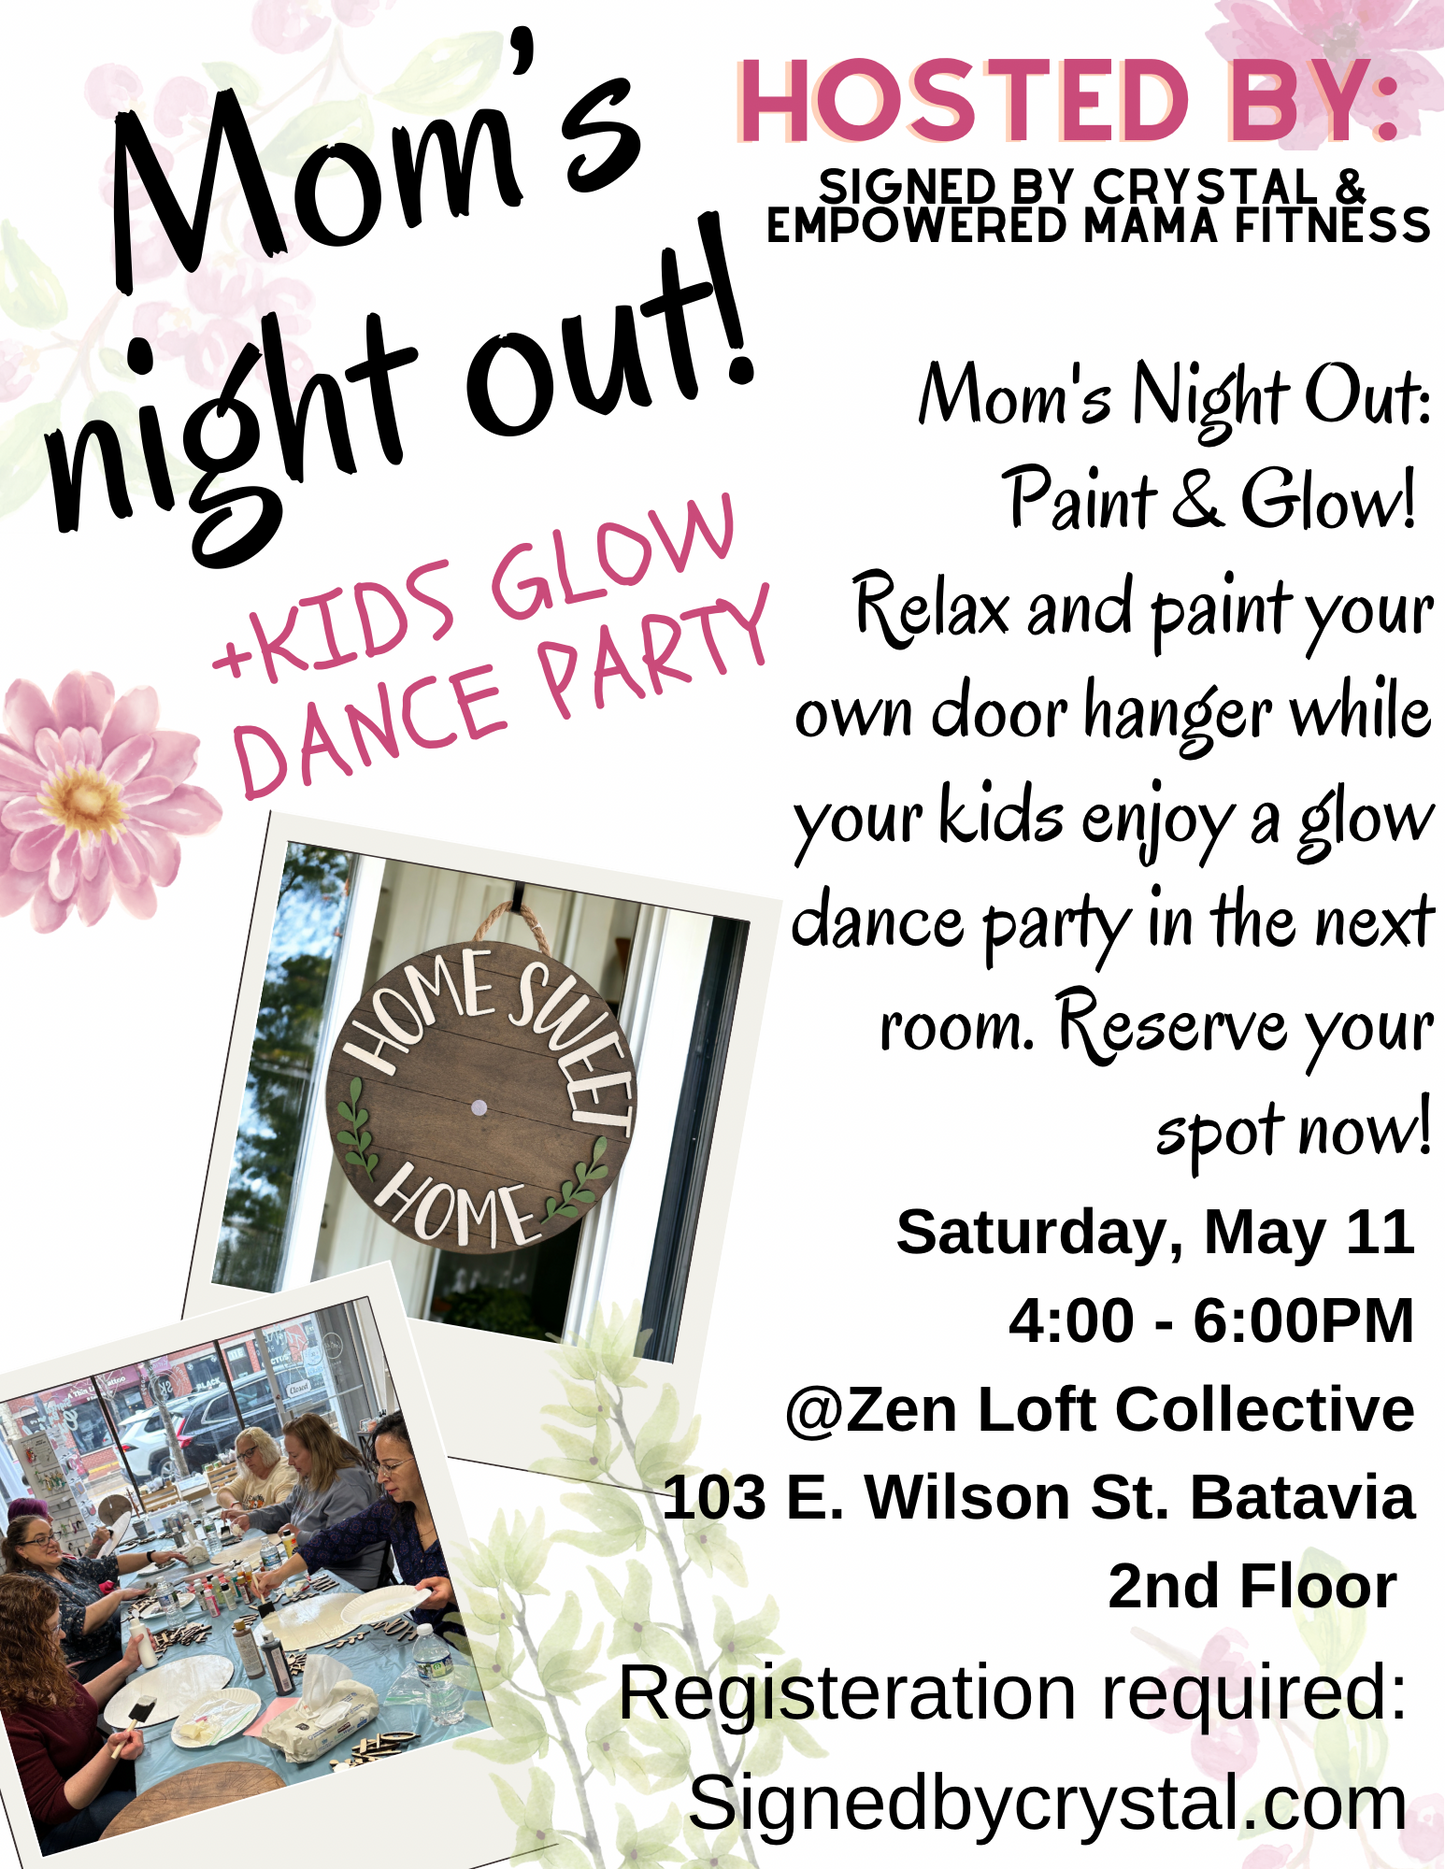 Mom's Night Out + Kids Glow Dance Party!